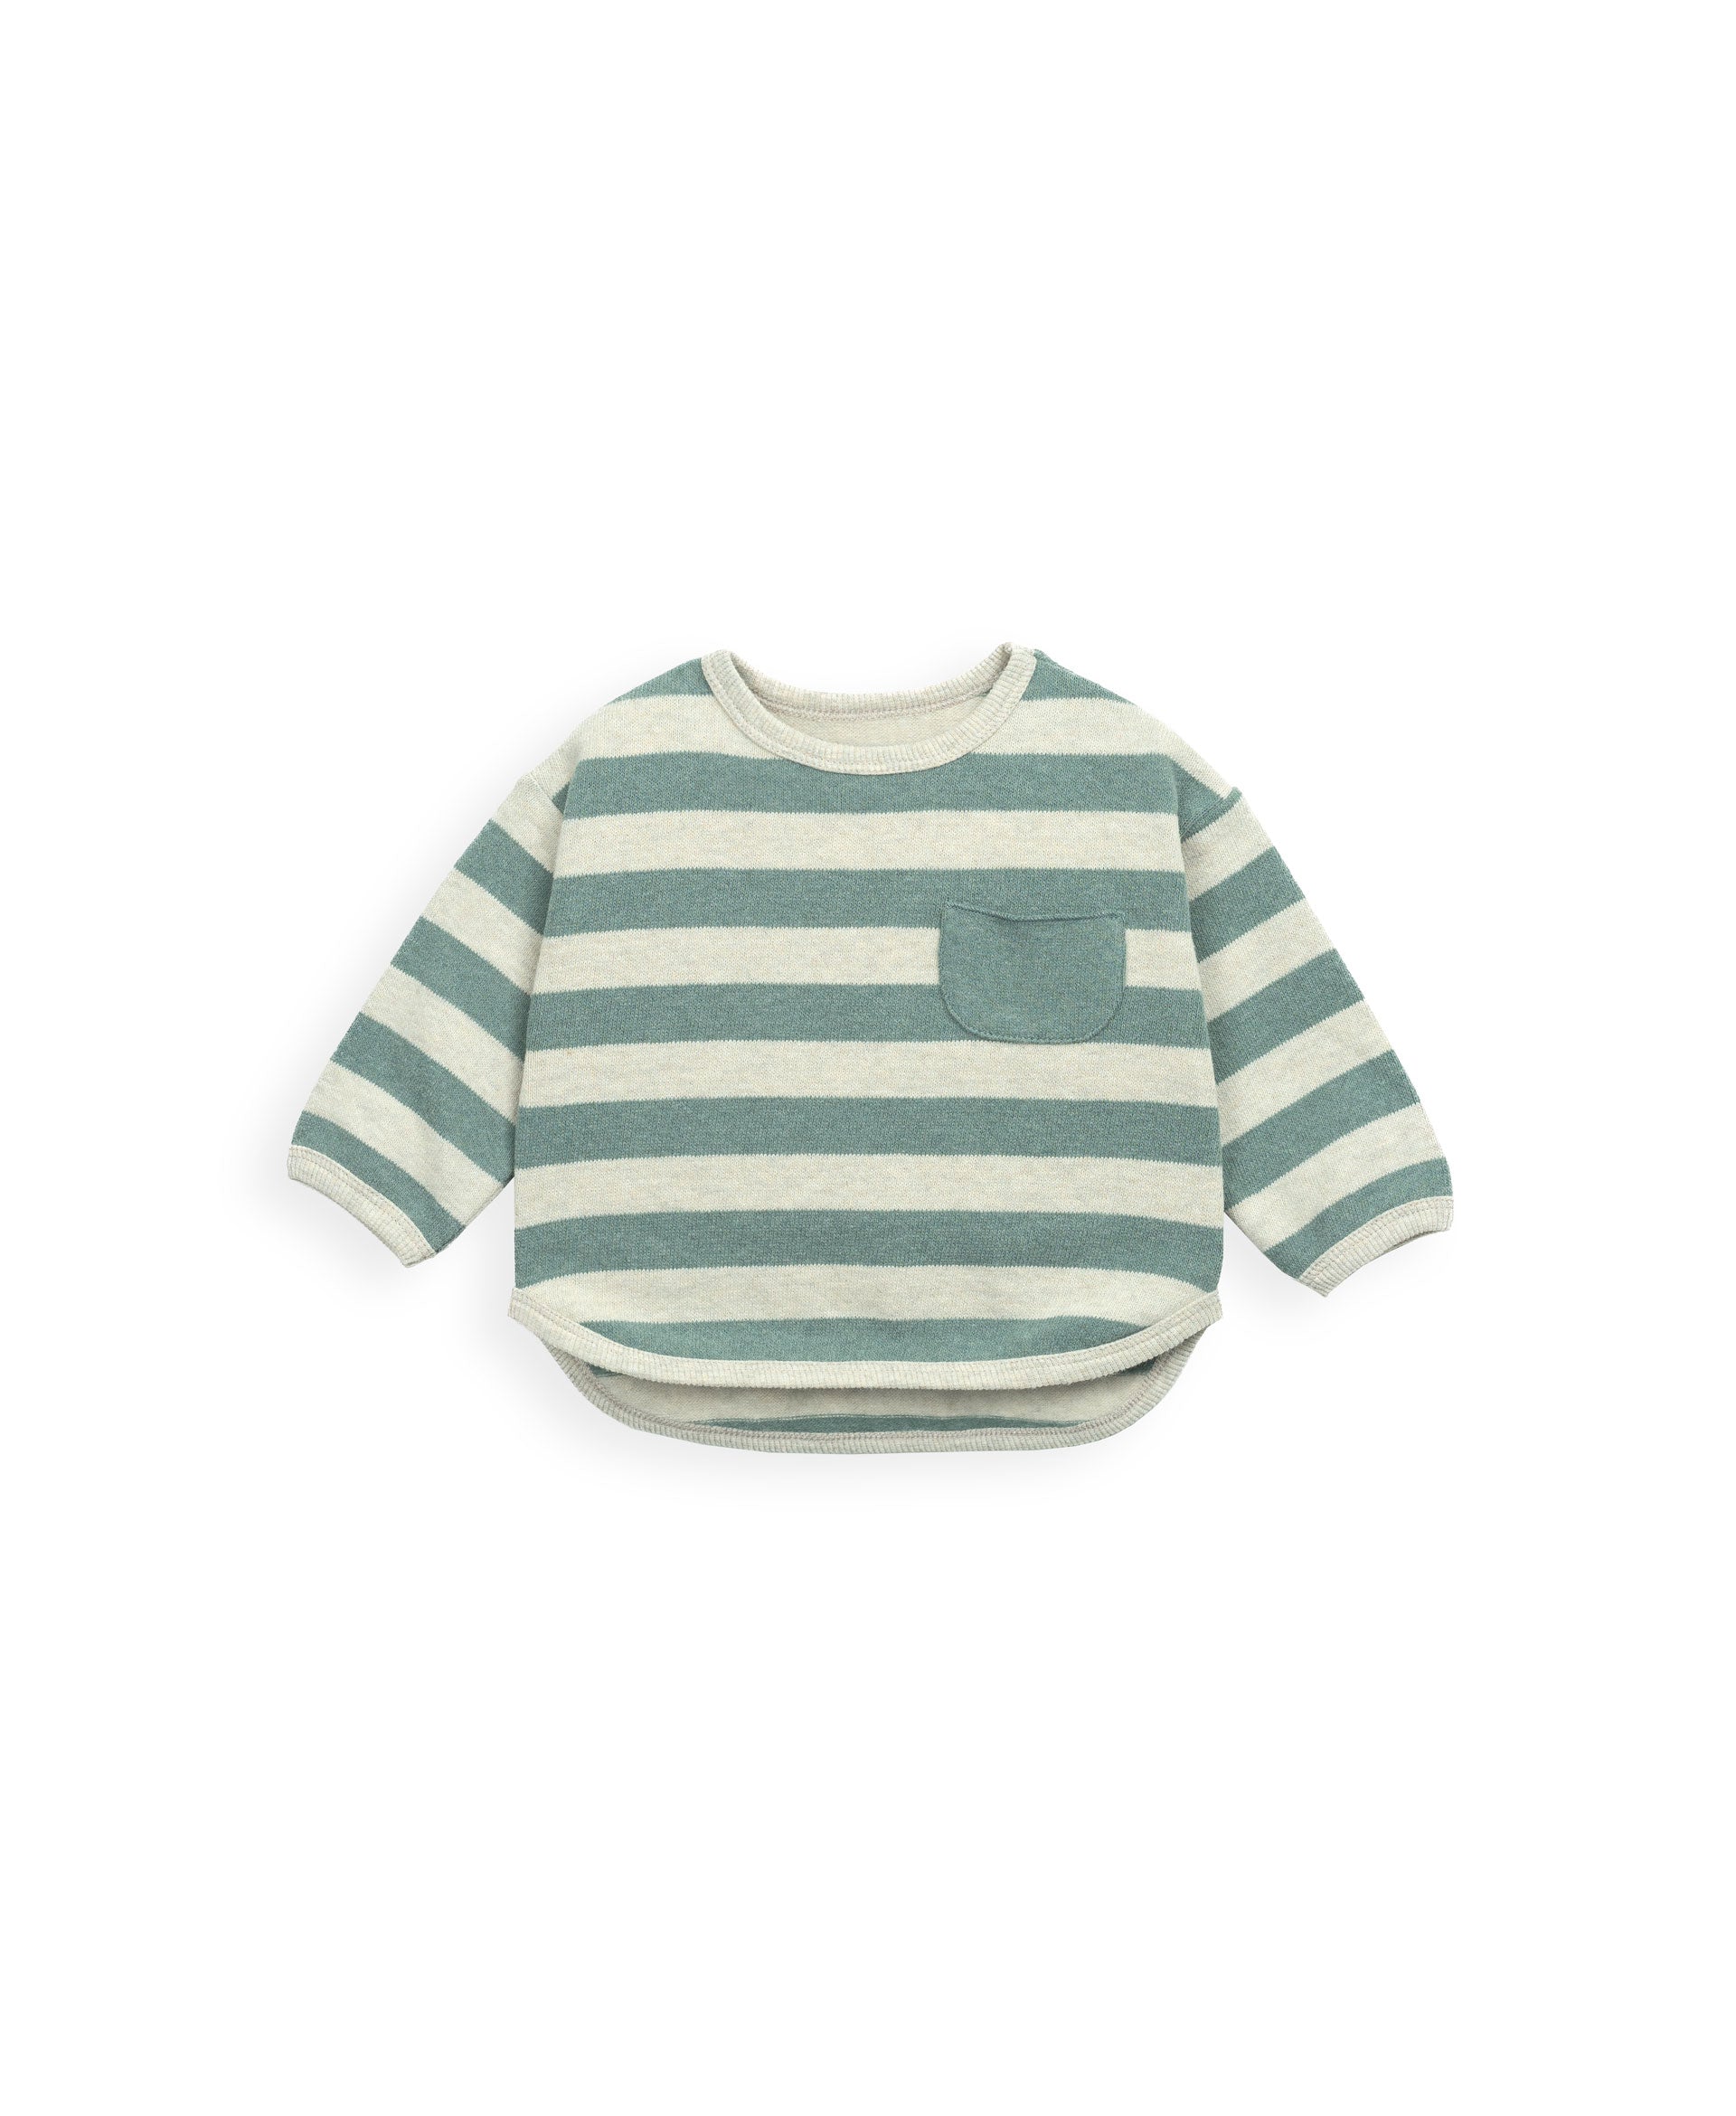 PLAY UP / Striped Jersey Sweater